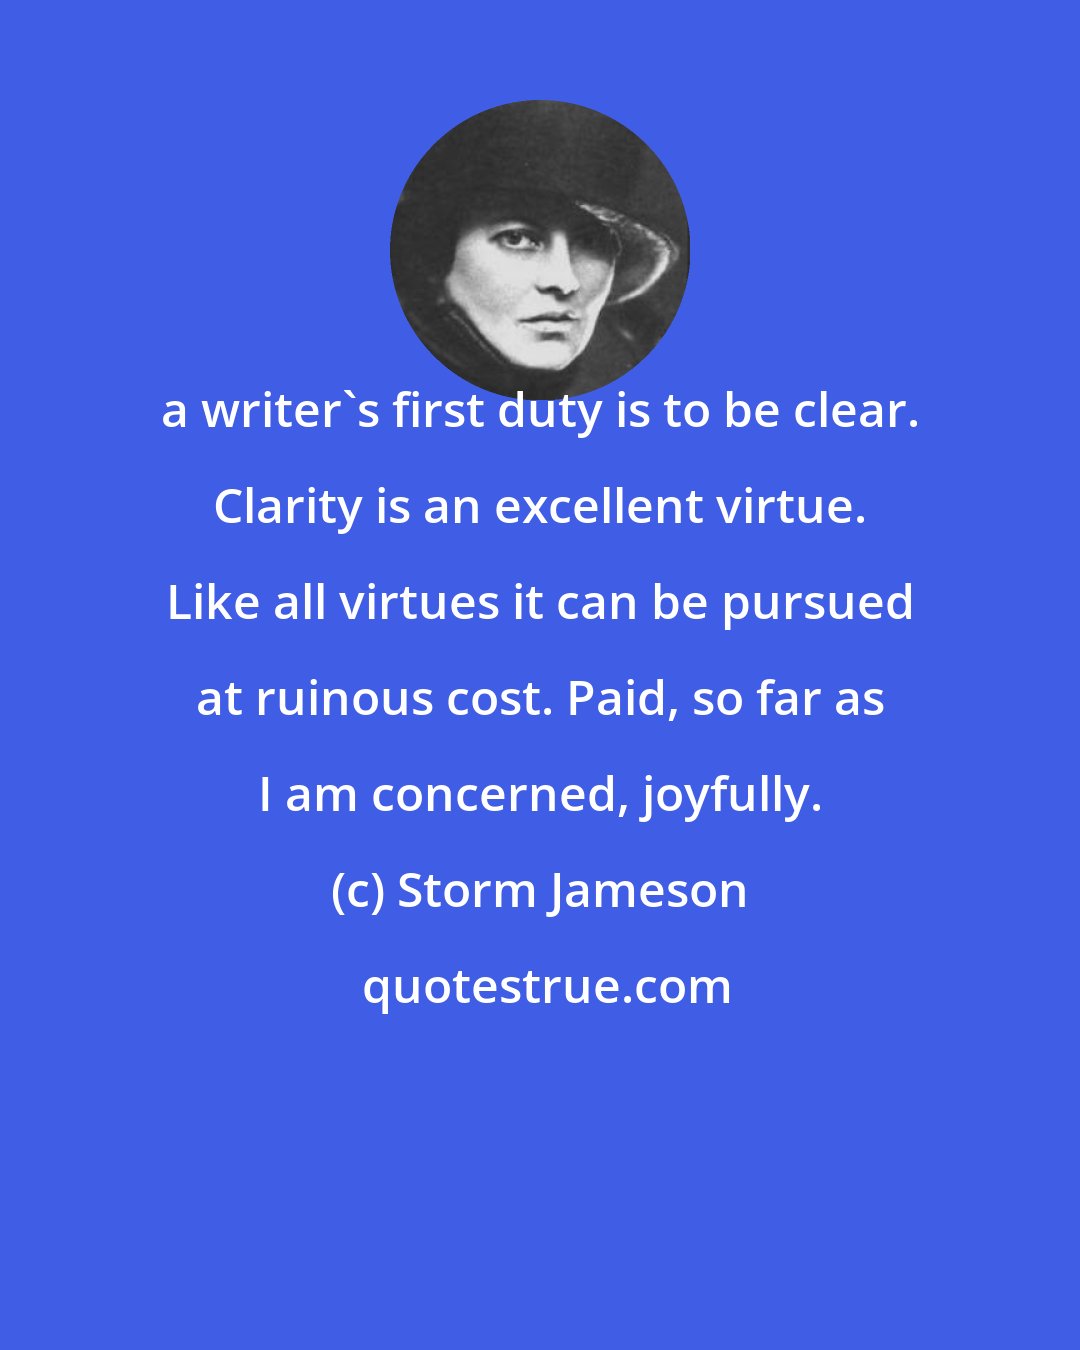 Storm Jameson: a writer's first duty is to be clear. Clarity is an excellent virtue. Like all virtues it can be pursued at ruinous cost. Paid, so far as I am concerned, joyfully.